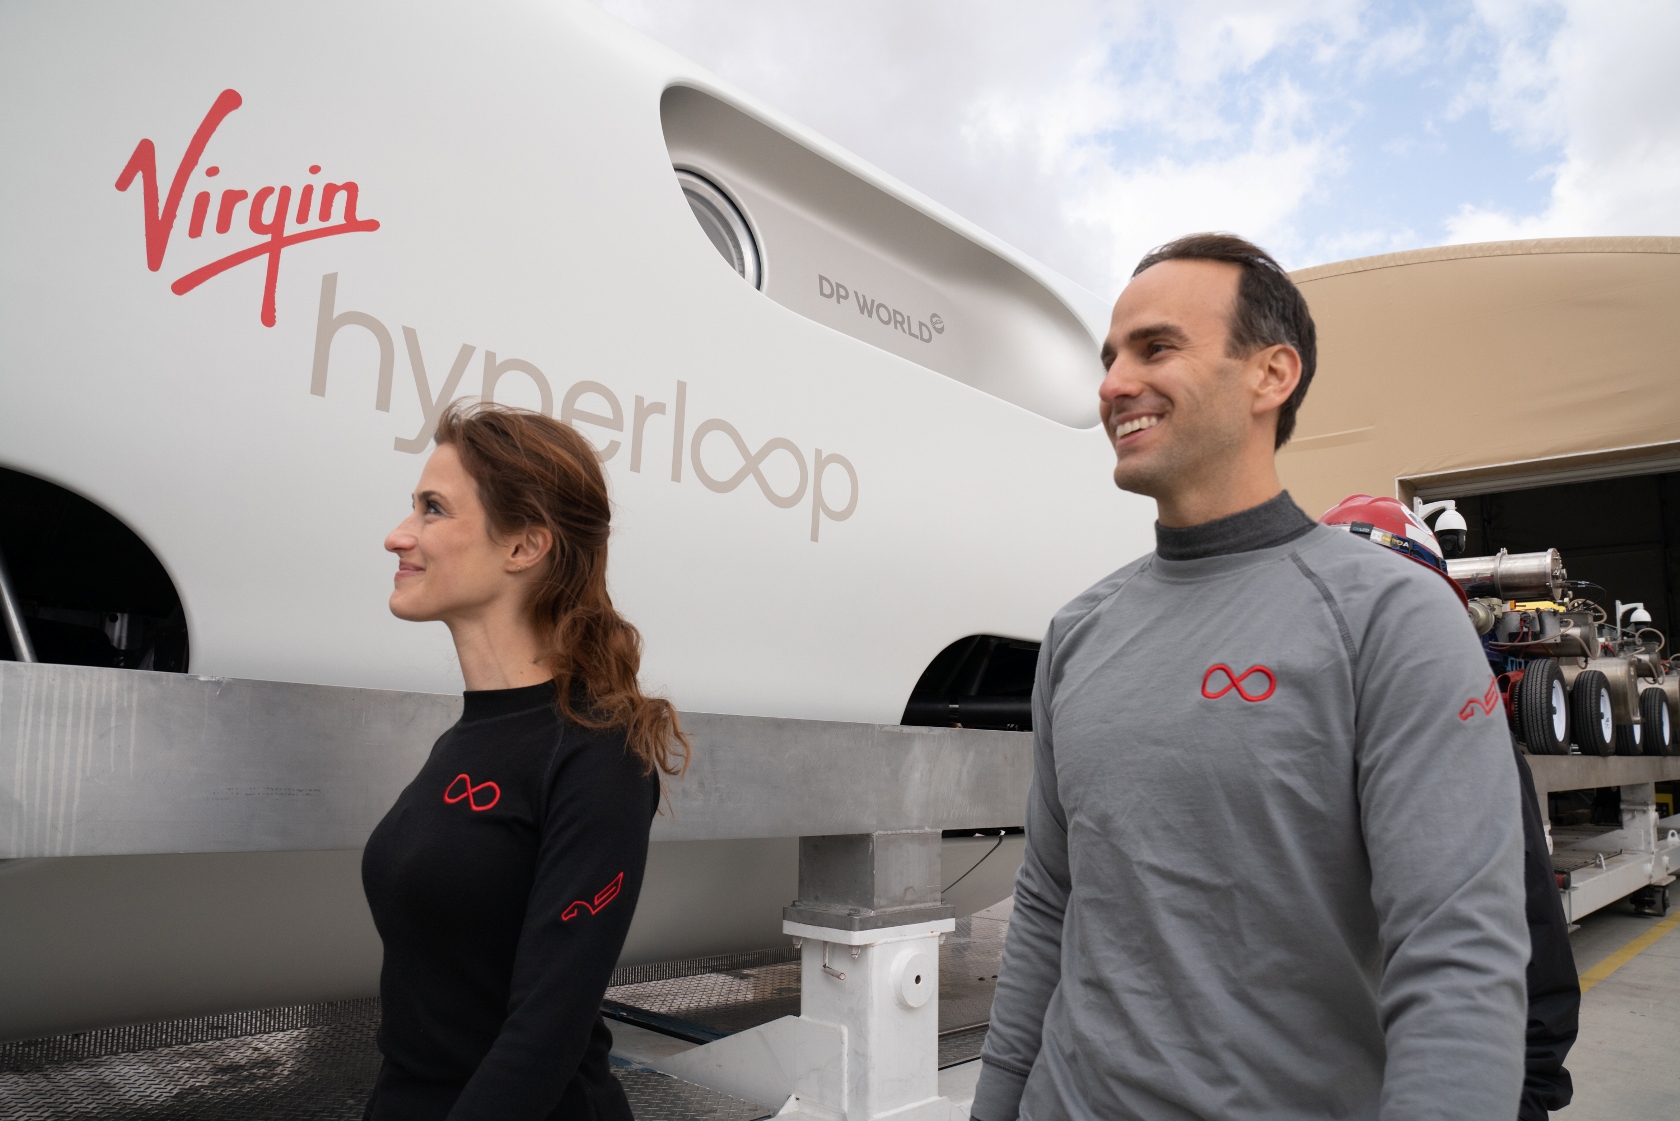 Virgin Hyperloop Made History Today as the First People Successfully Travelled in a Hyperloop Pod